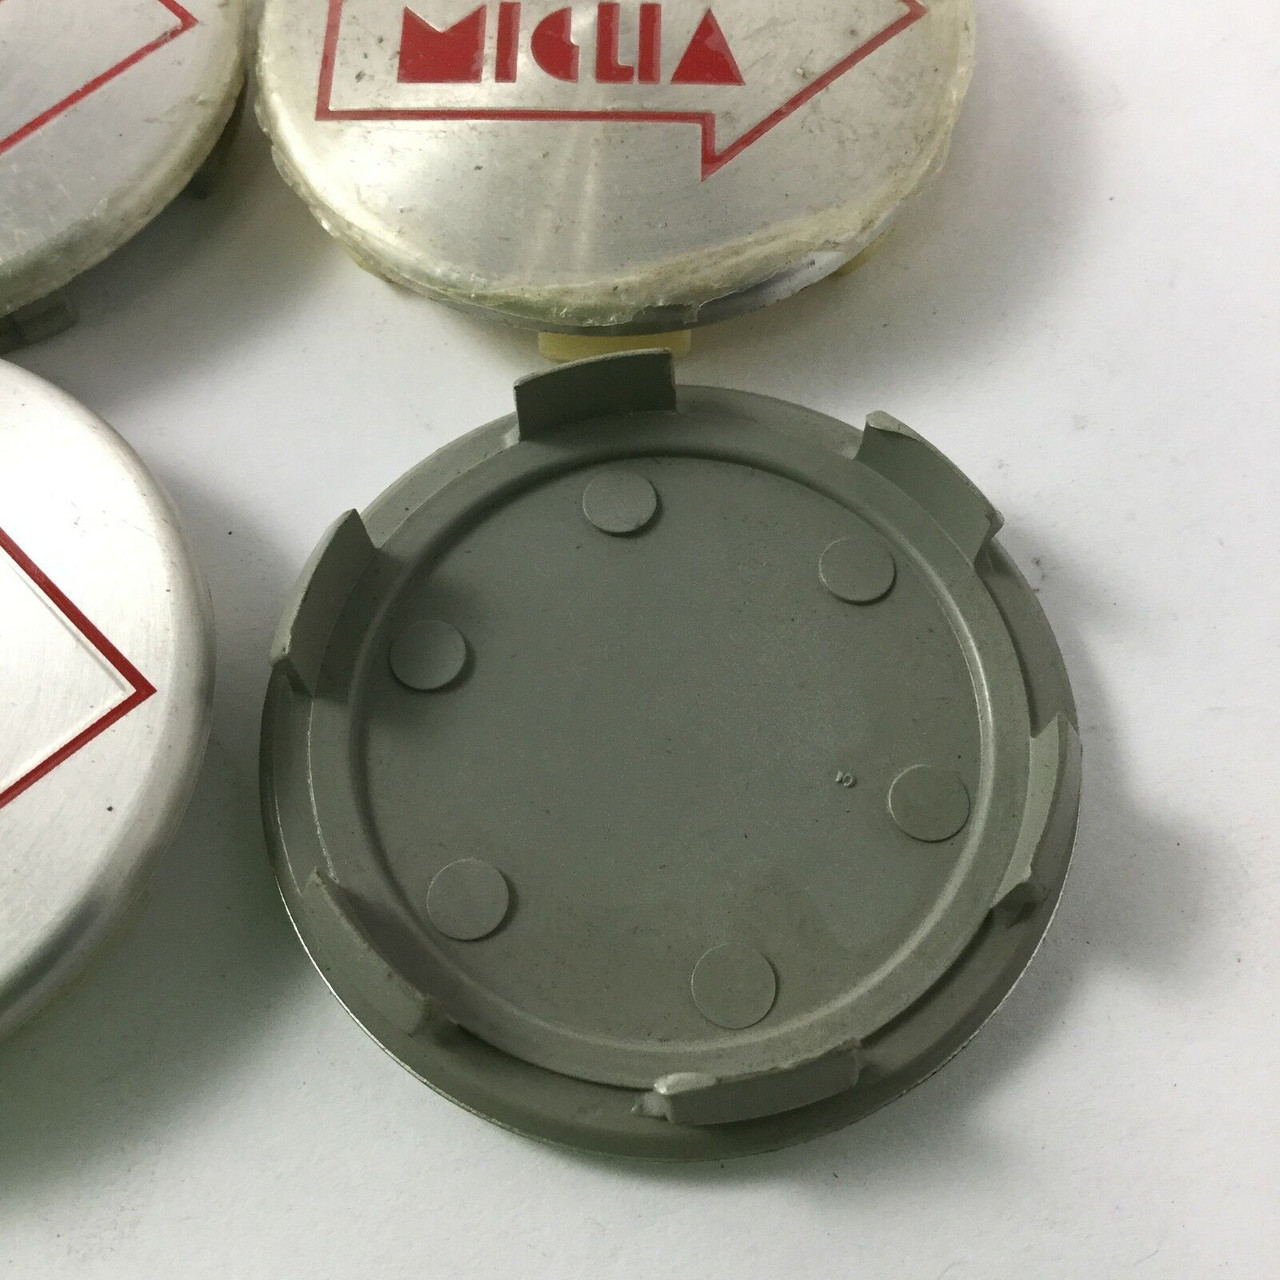 Set 4 Mille 1000 Miglia Wheel Center Caps Silver Machined Red Letter 52.5mm MIG6